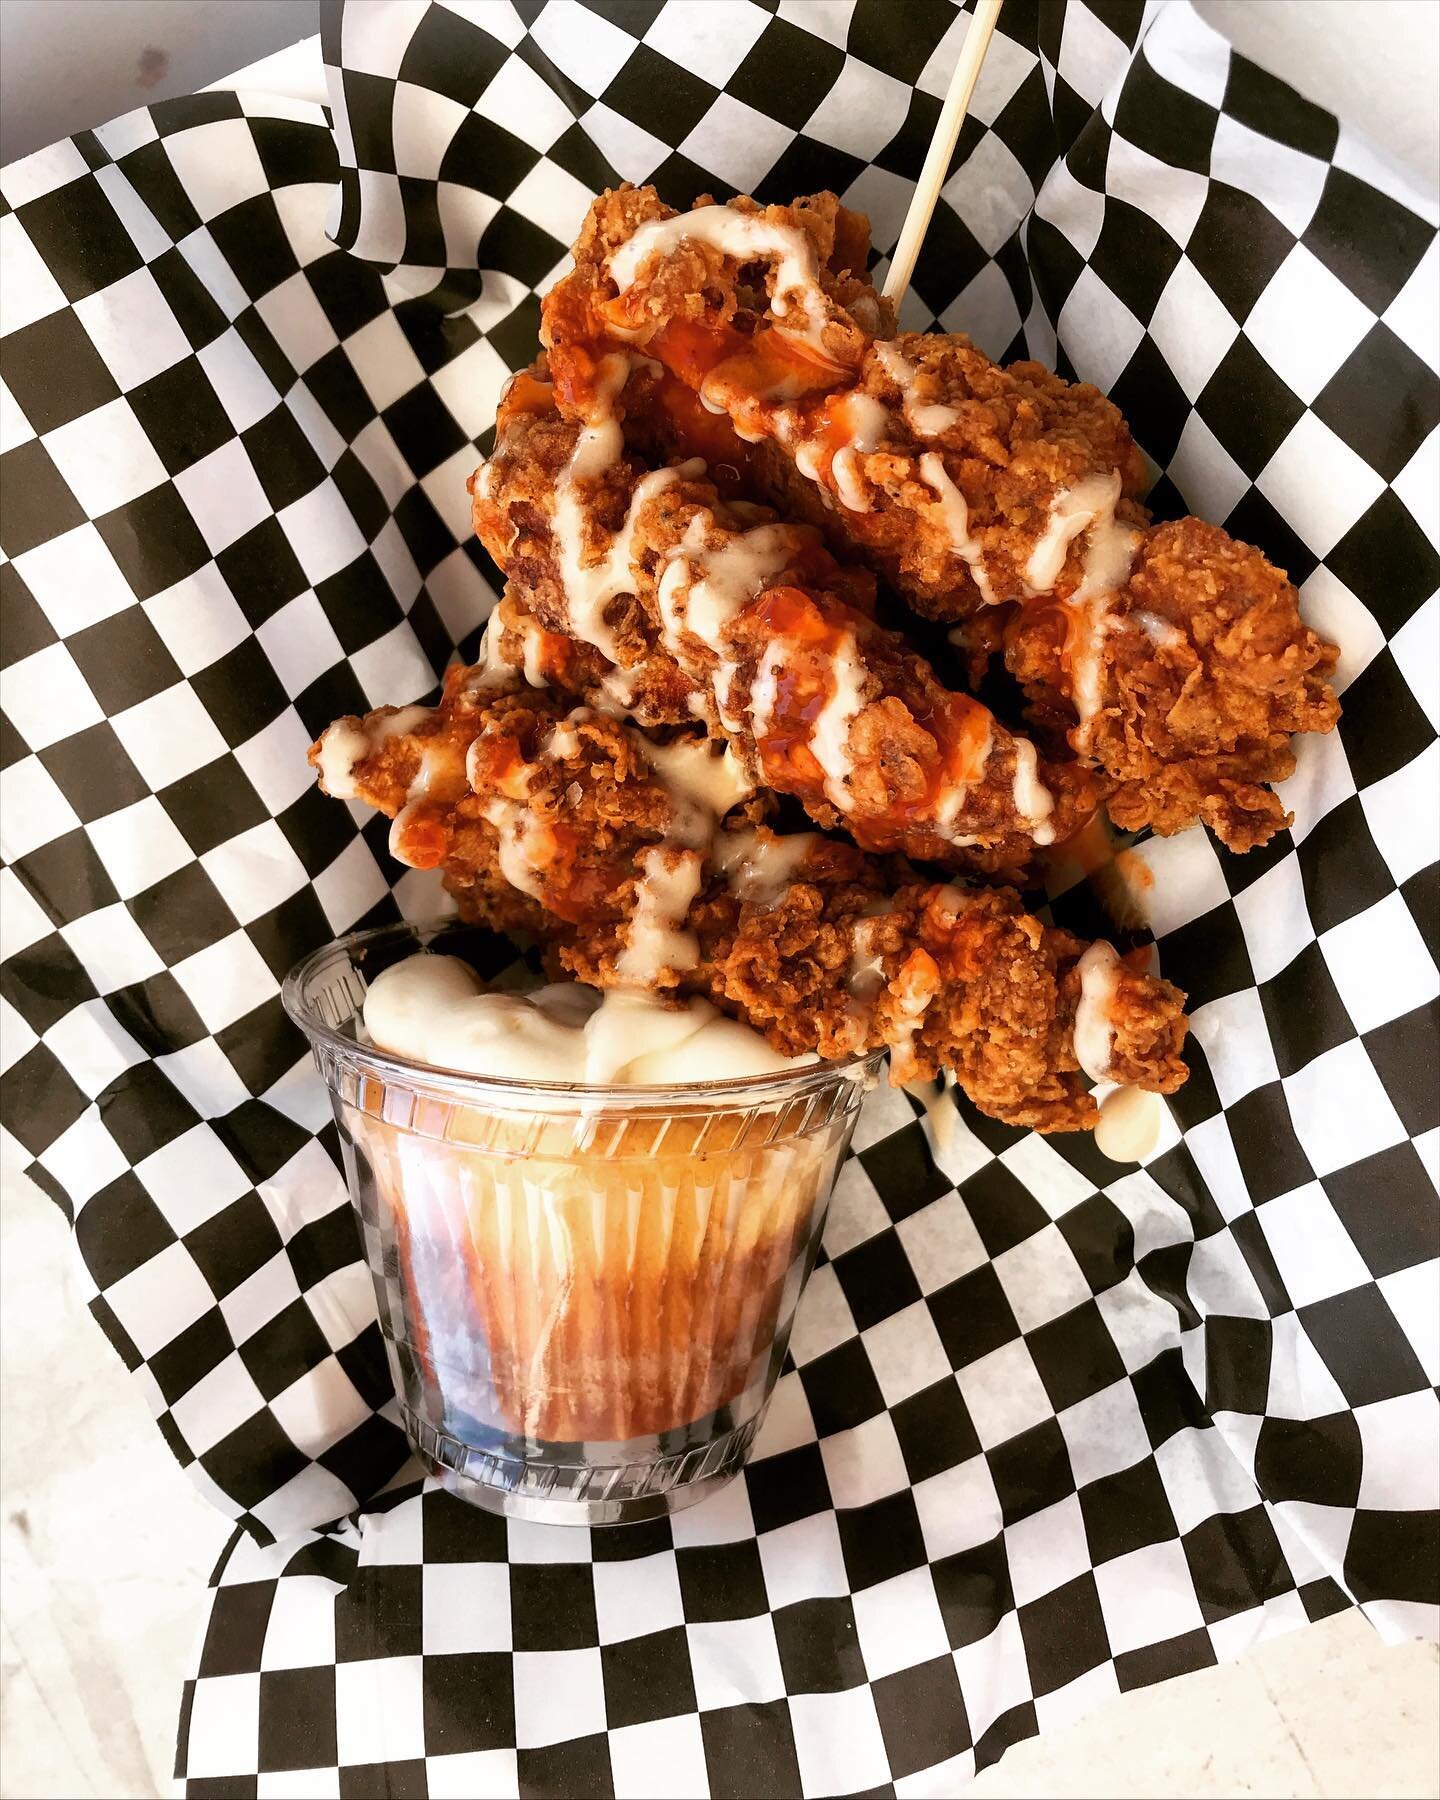 Mmmmmmm, hellelela yummy nummers! Chicken with sweet/savory drizzles and sweet potato waffle cupcake #cacaomilkbar #thecrucible